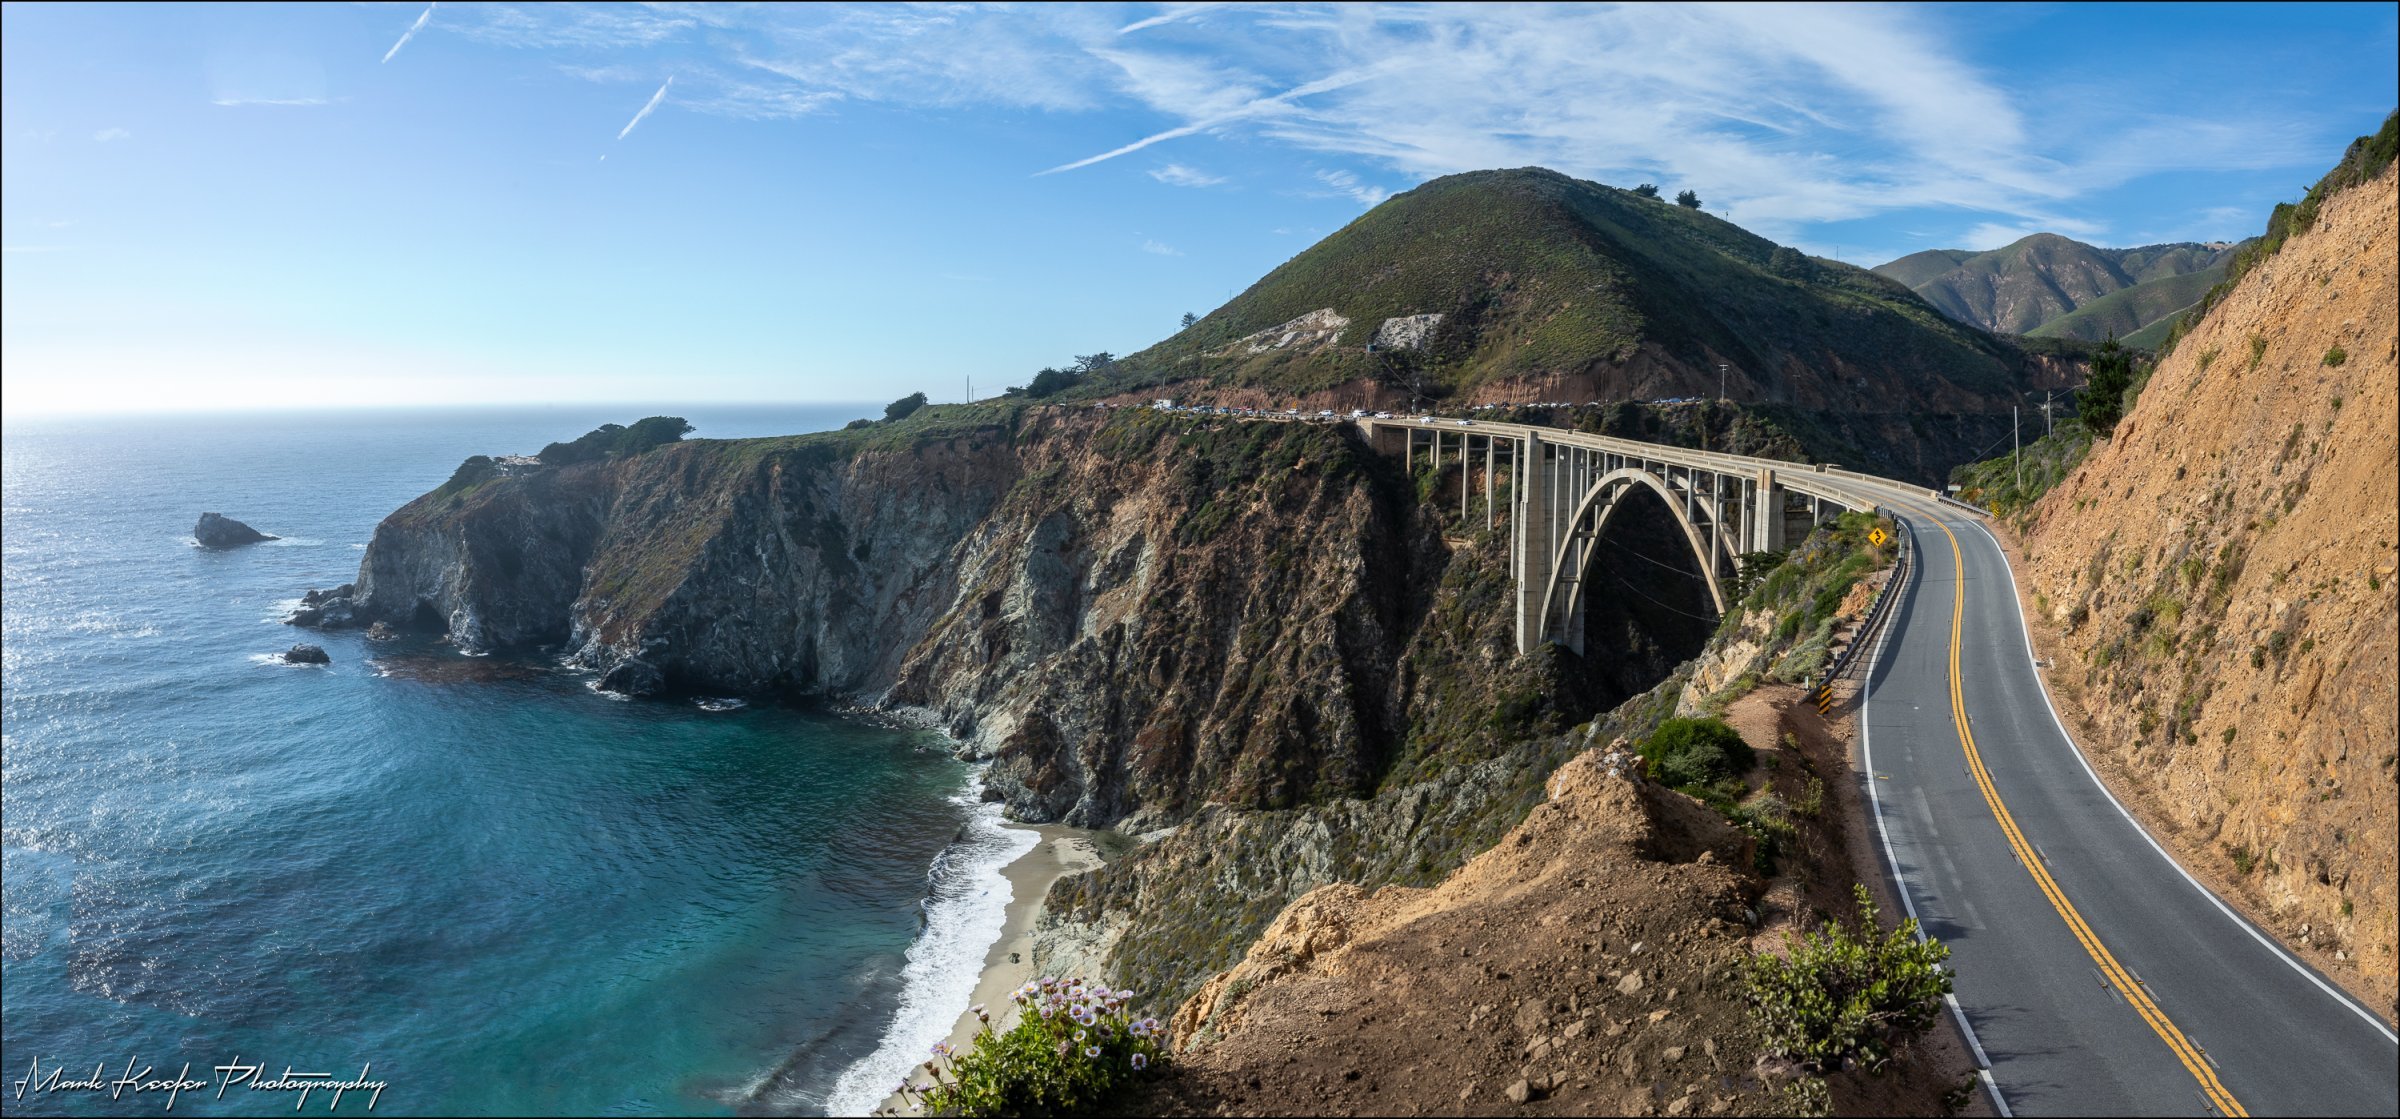 Bixby Bridge Panorama Composite 14 x 32-megapixel shots stitched together to create an 84.5-megapixel image reduced her to 3000 pixels wide.